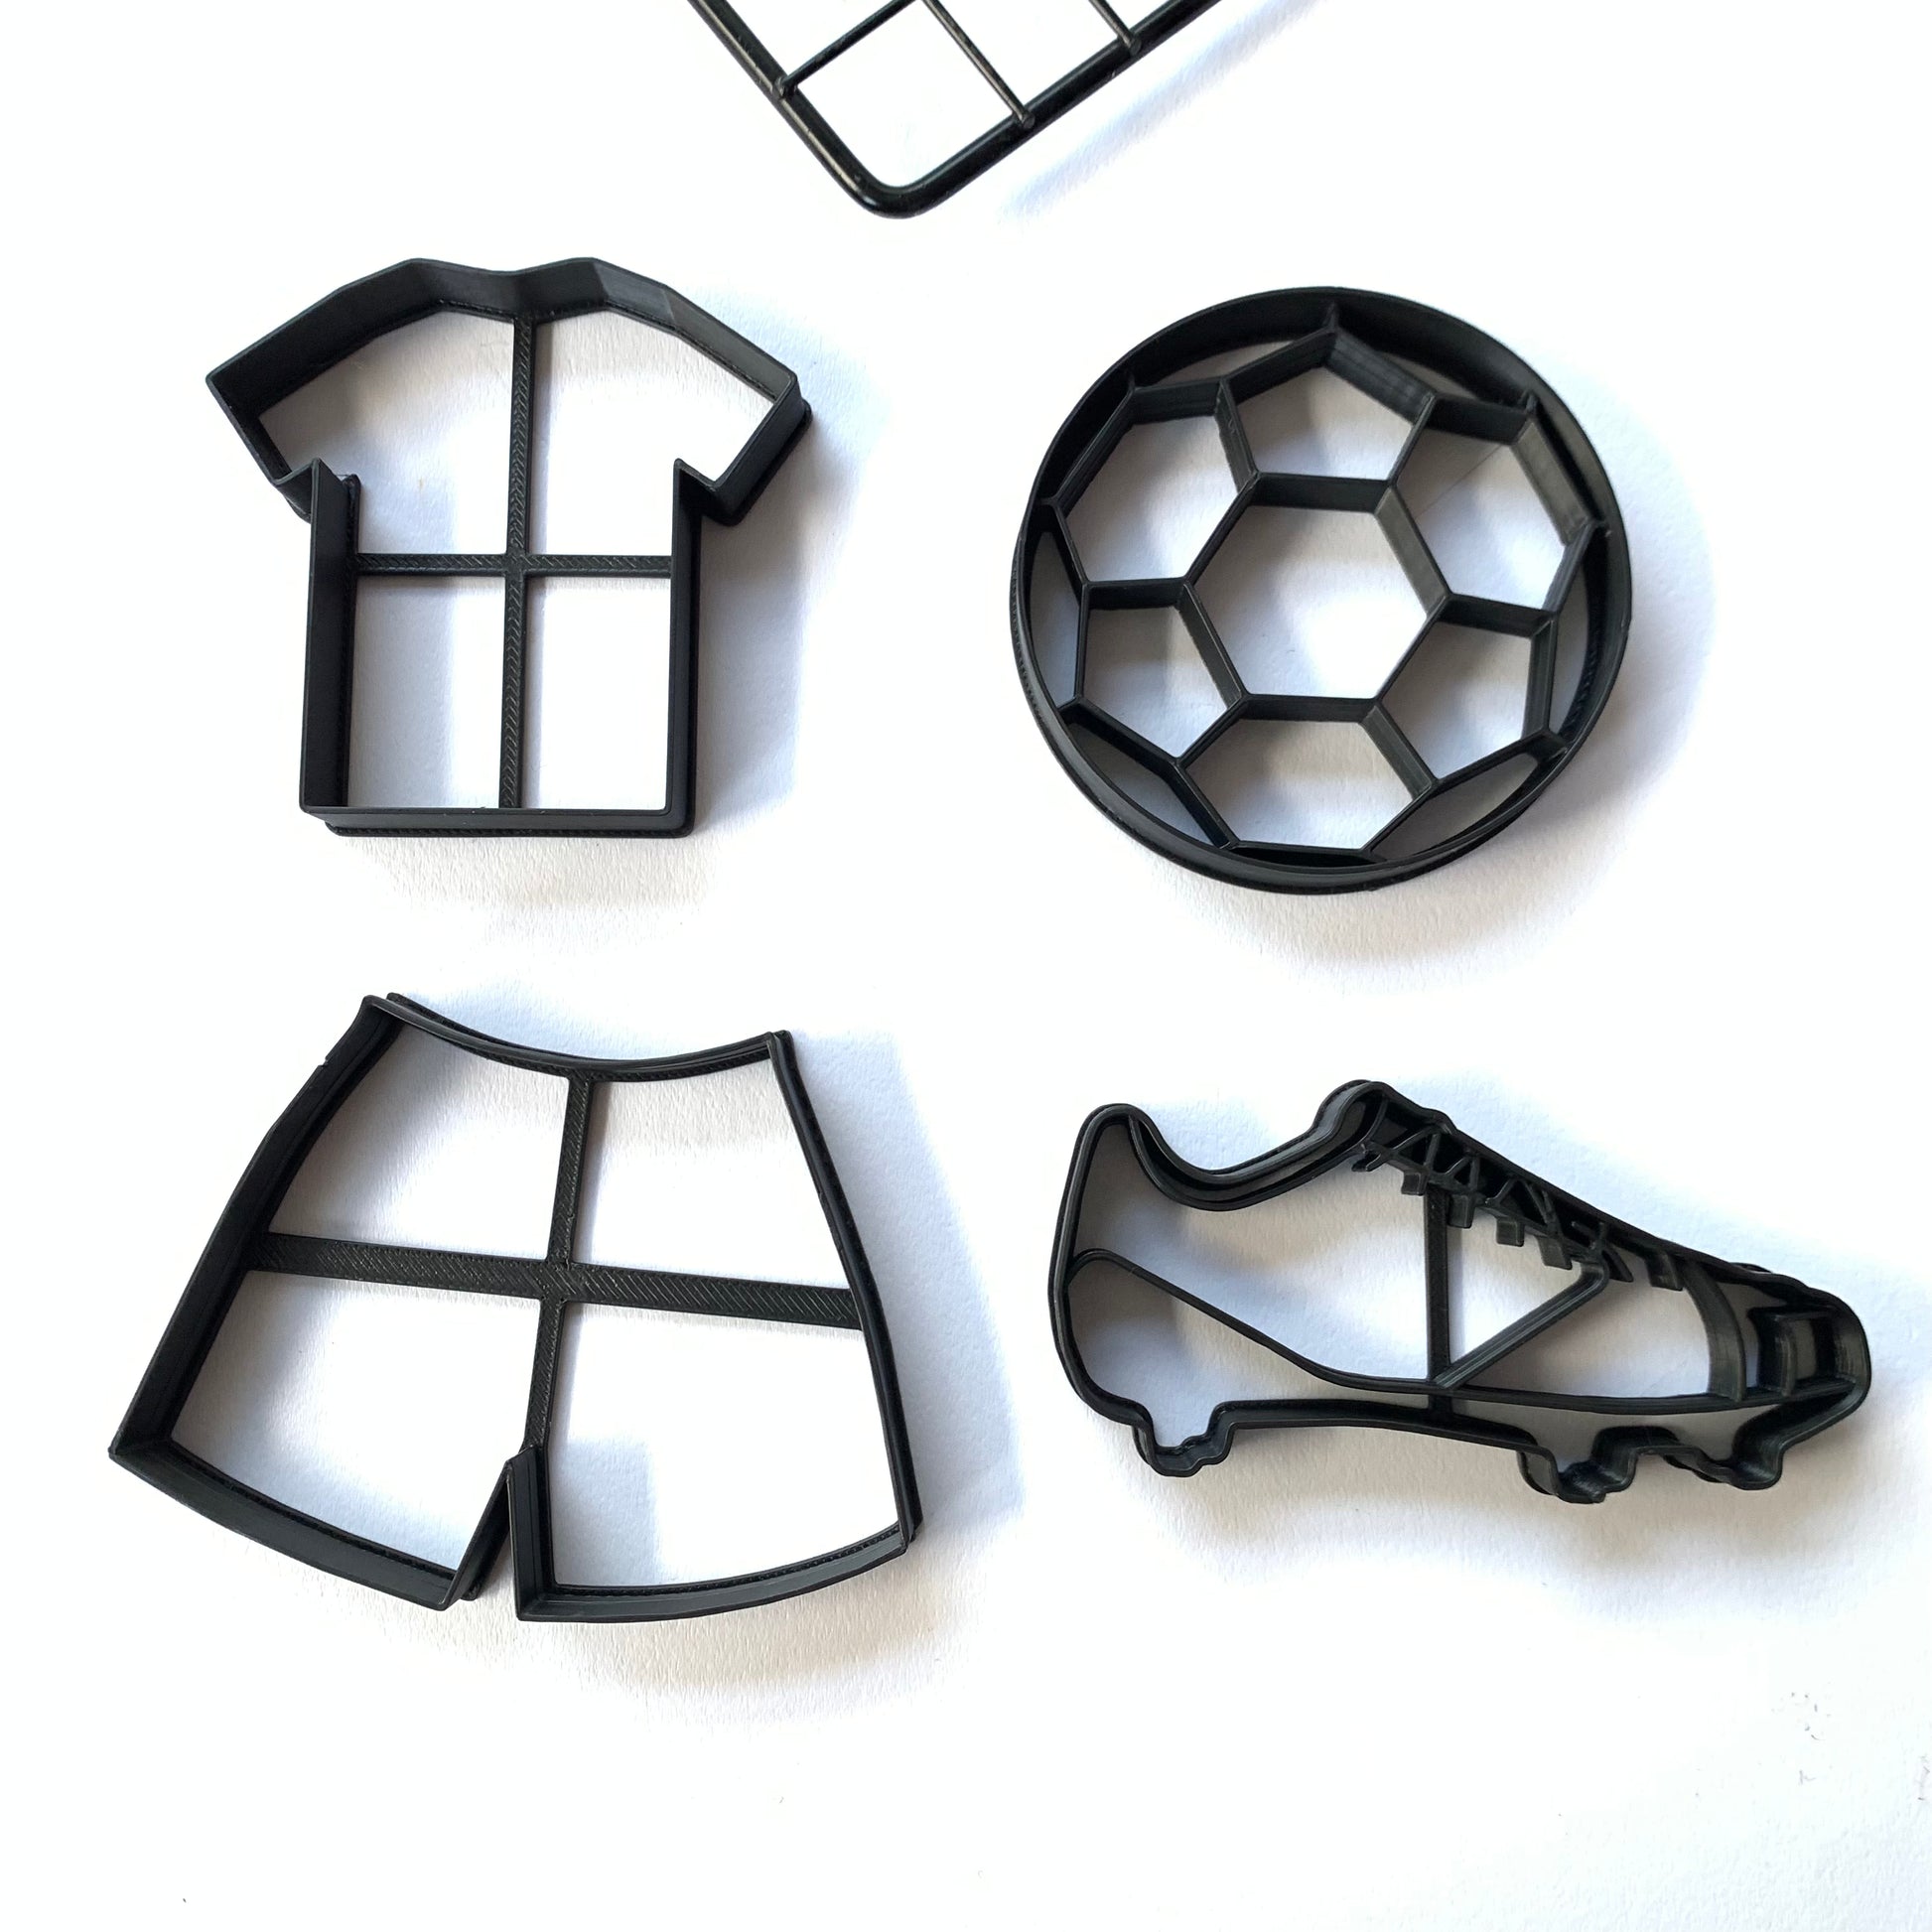 SET OF 4 Soccer / Football Uk Seller Plastic Biscuit Cookie Cutter Fondant Cake Decor MEG cookie cutters